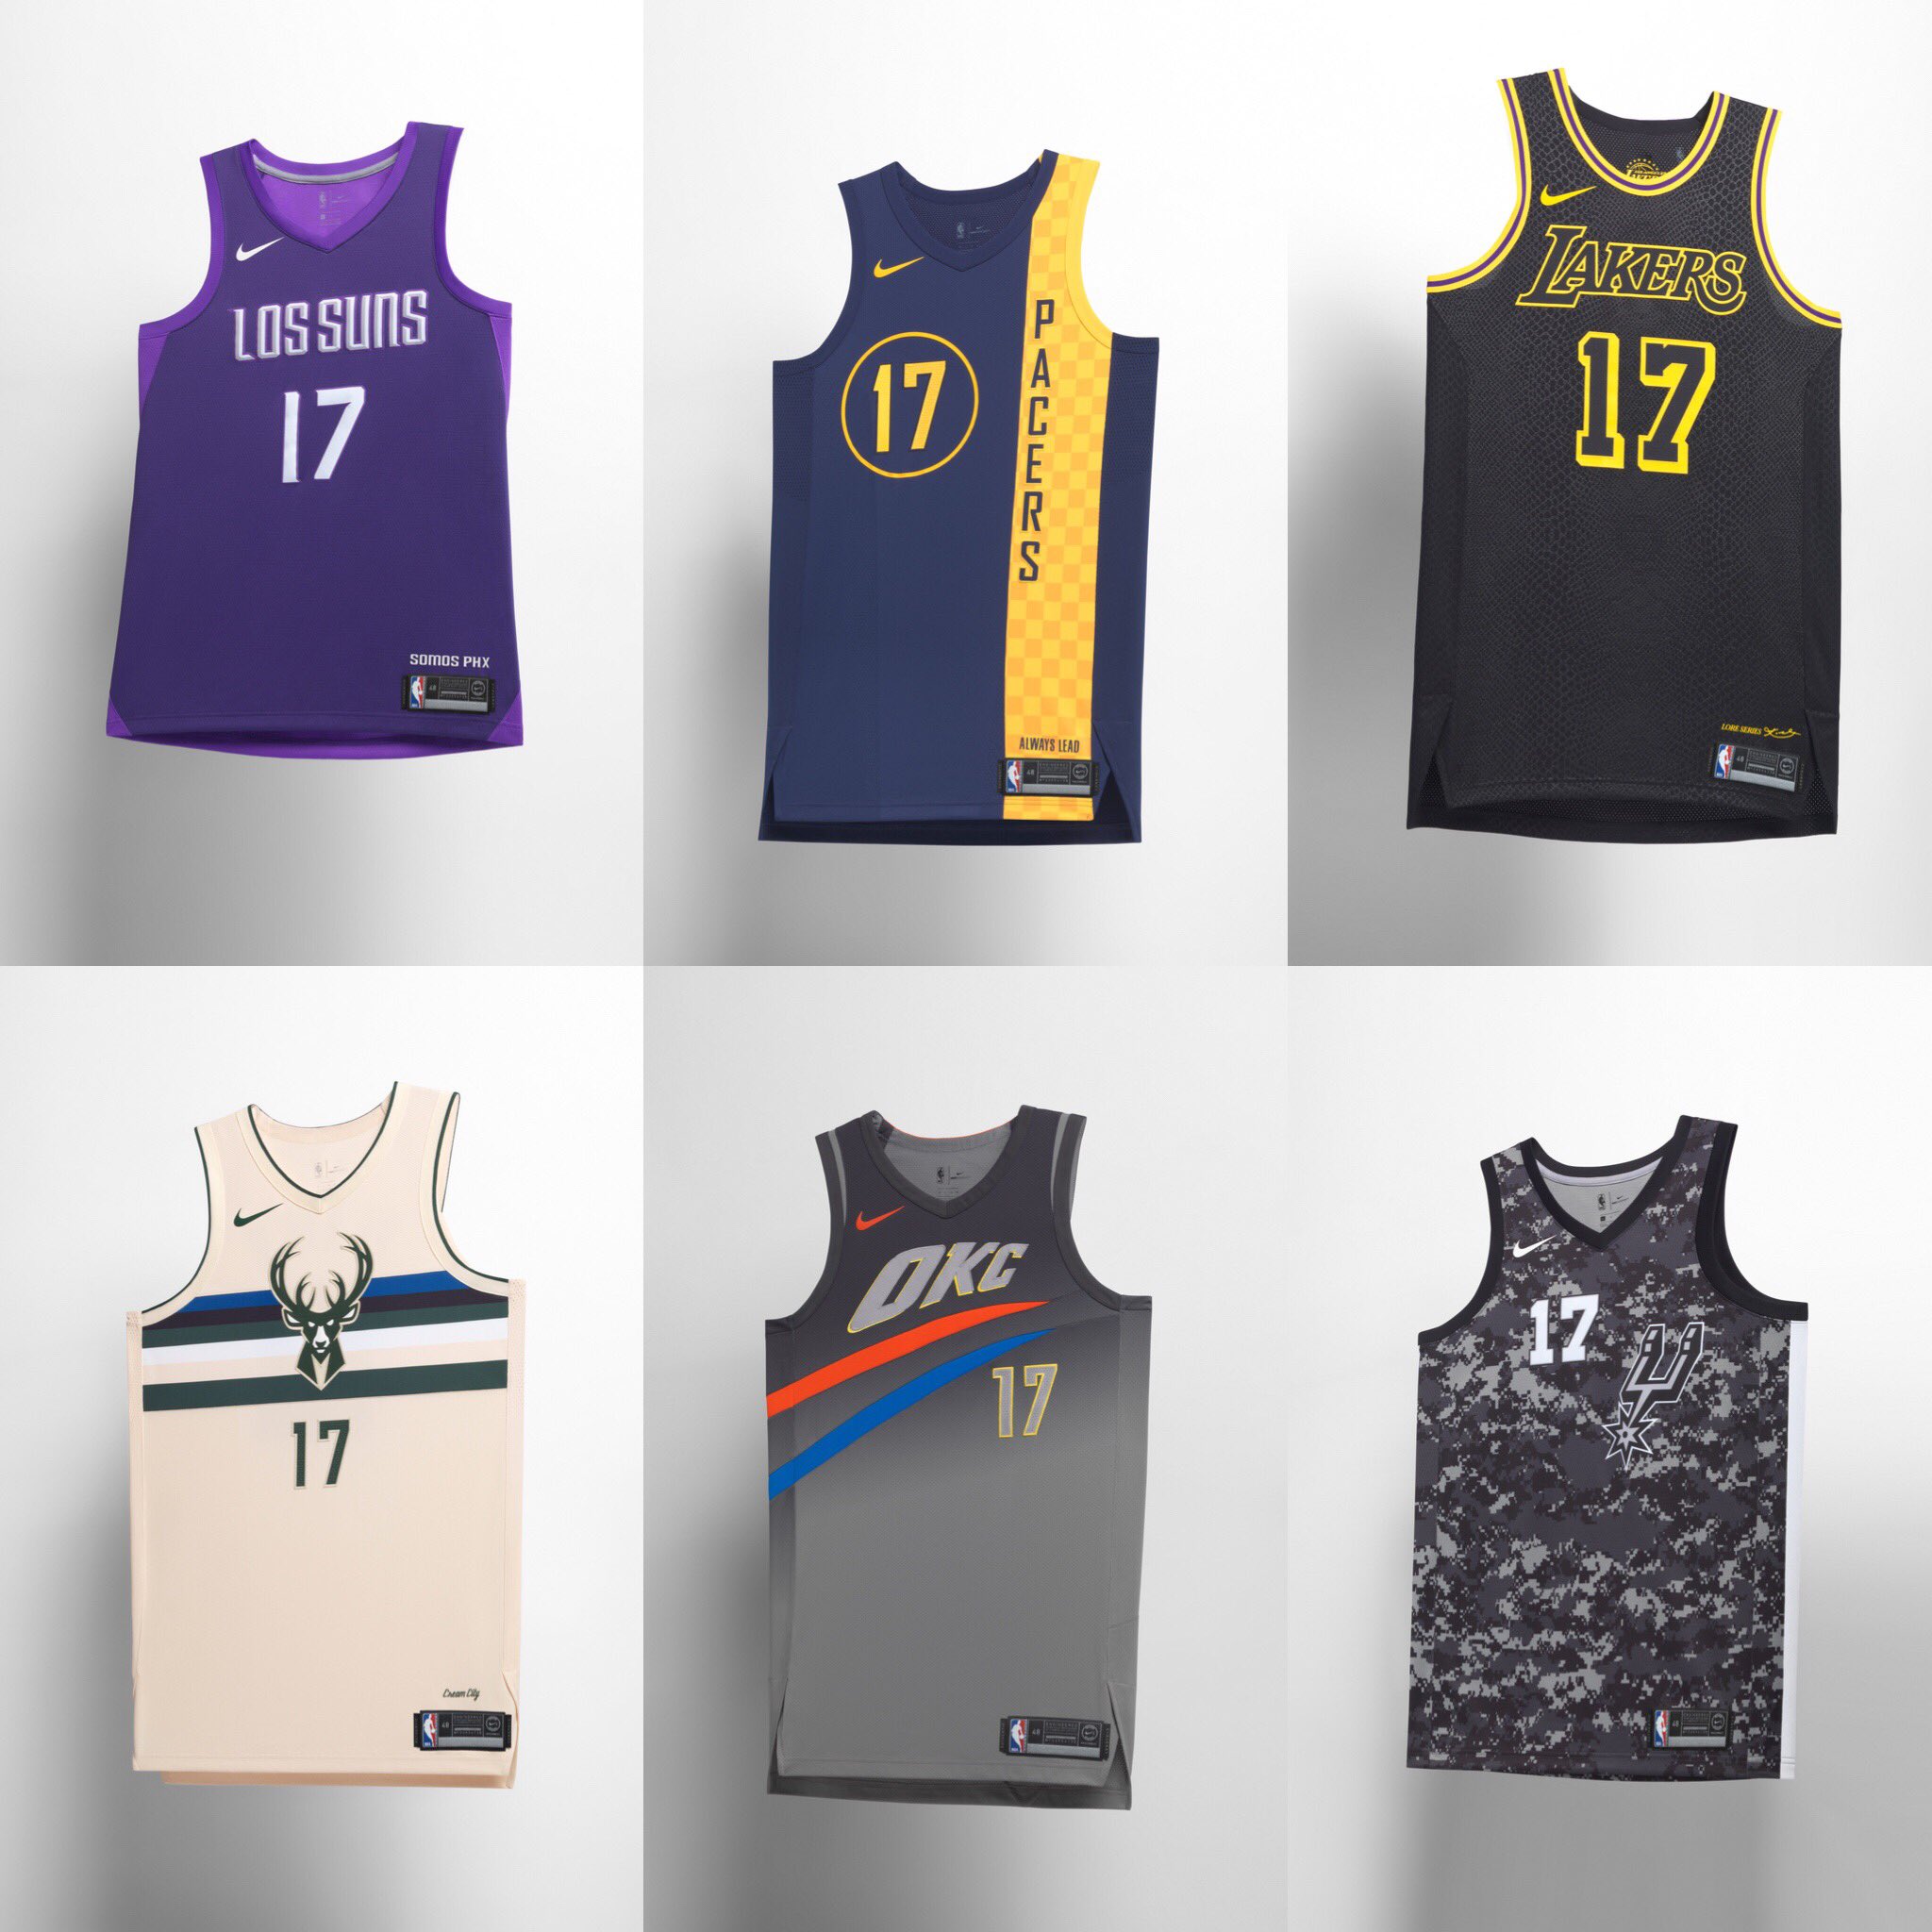 Champs Sports - Put on for your city, Rep your team with the 2019-20 NBA  City Edition jerseys from Nike #WeKnowGame Shop